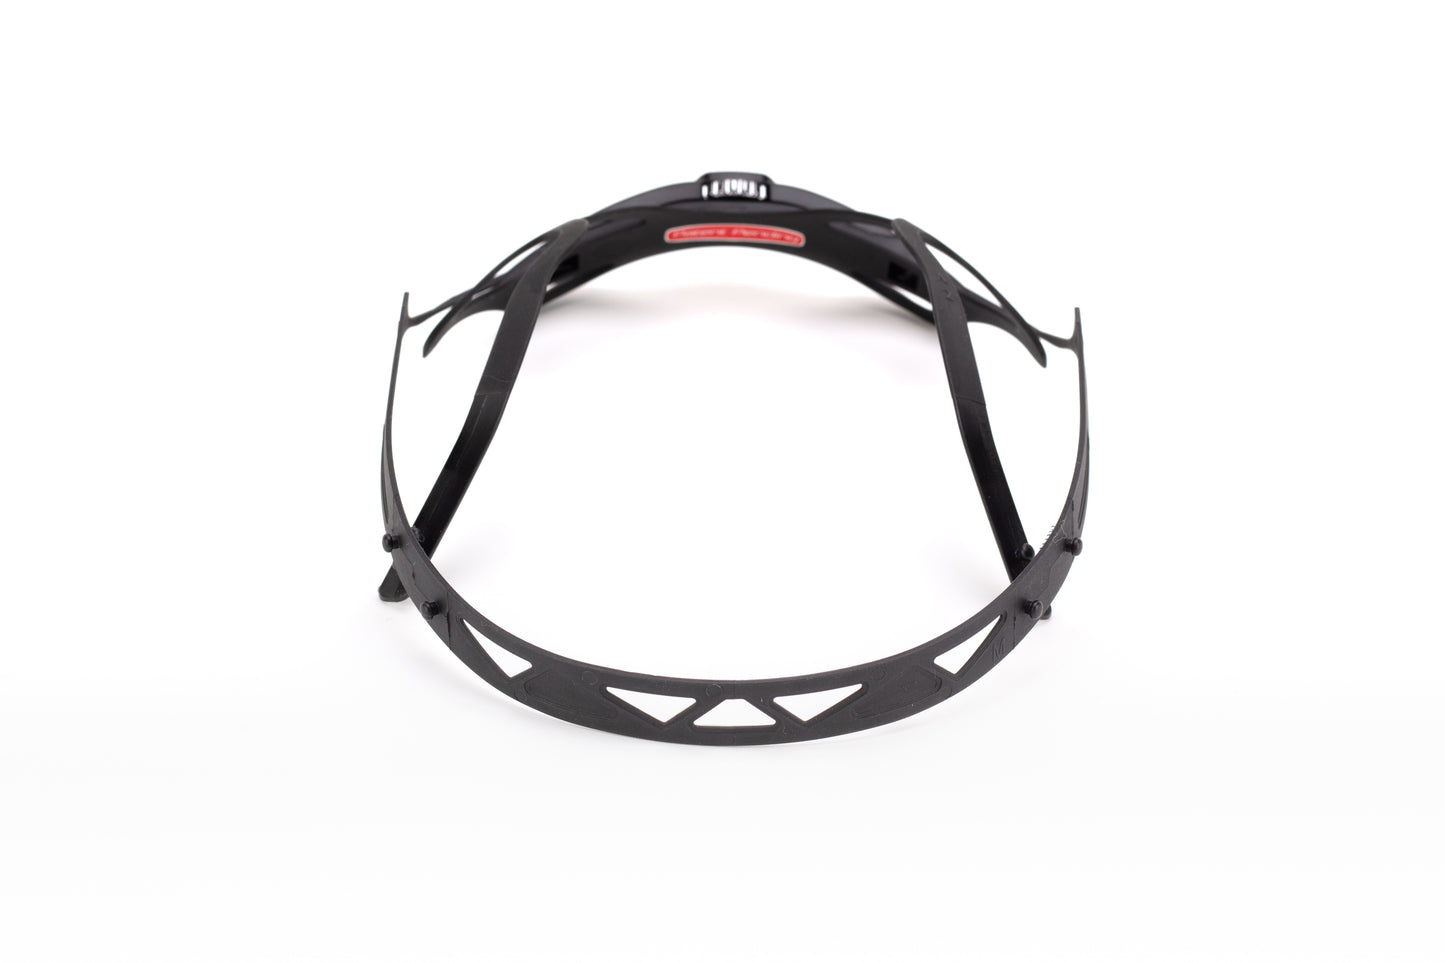 Specialized Headset Sl Fit System